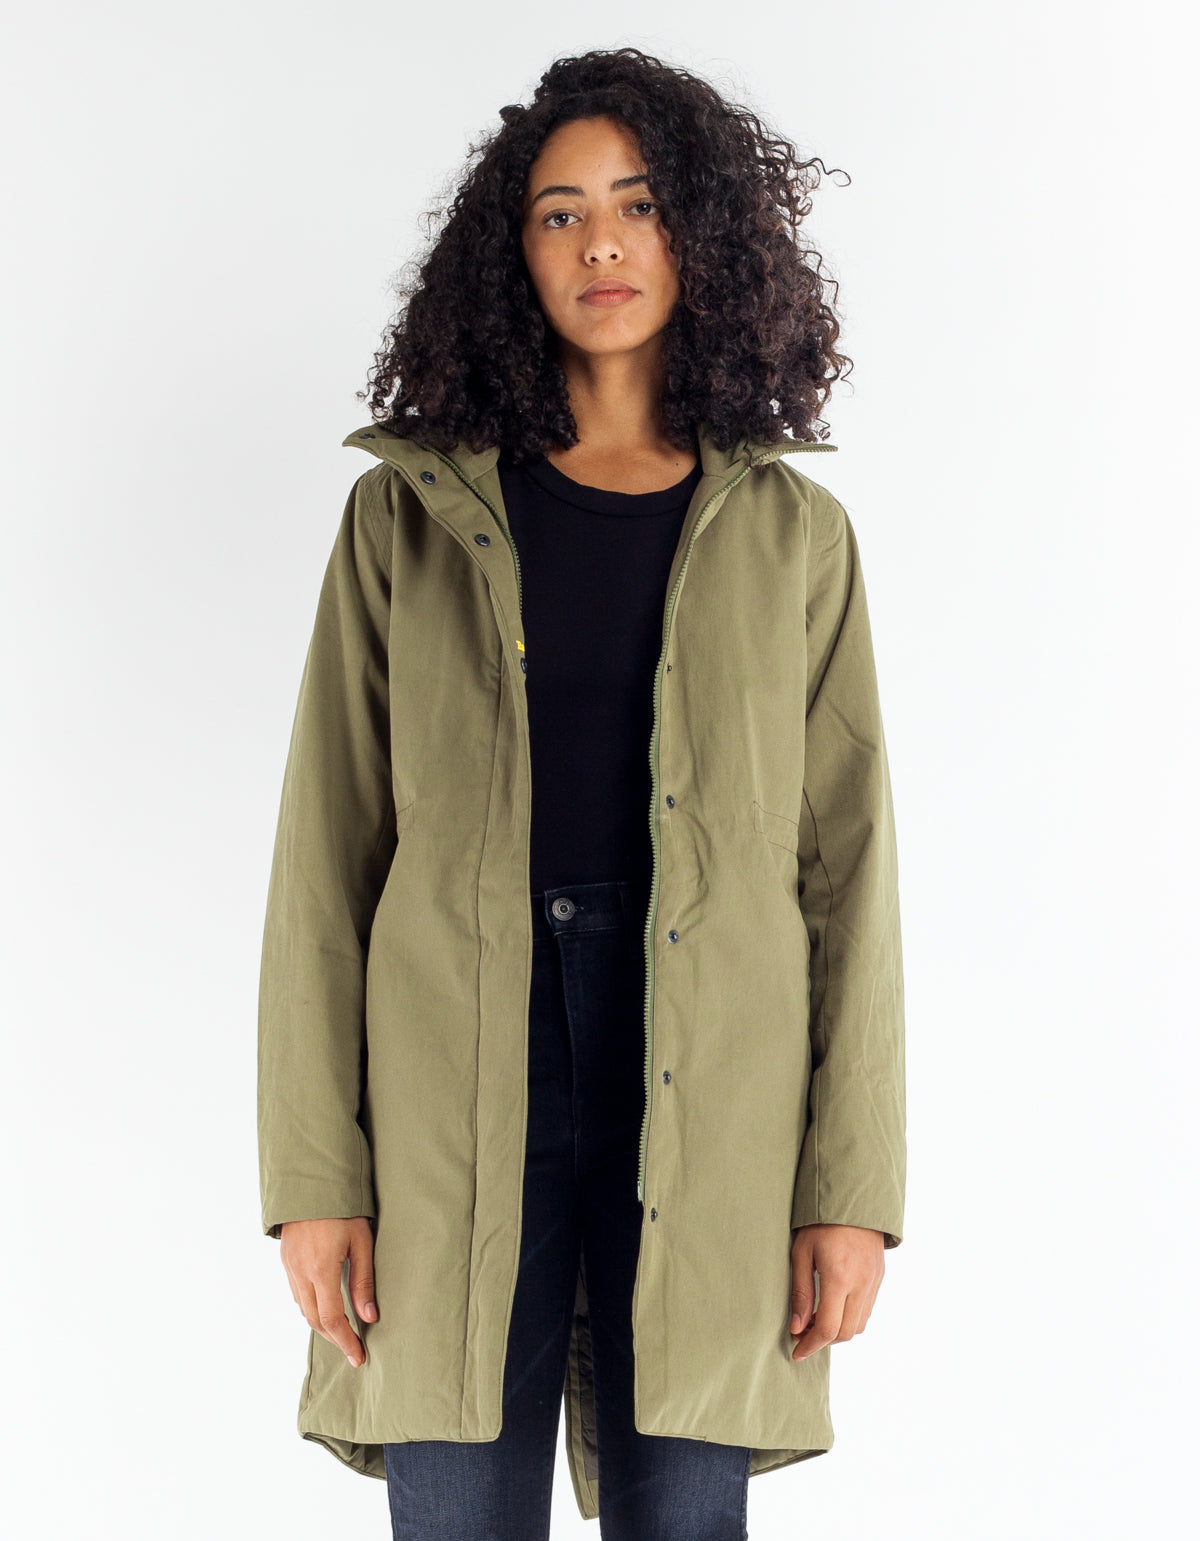 NWT WOMENS BARO NORTHLANDS INSULATED JACKET $300 loden green | eBay